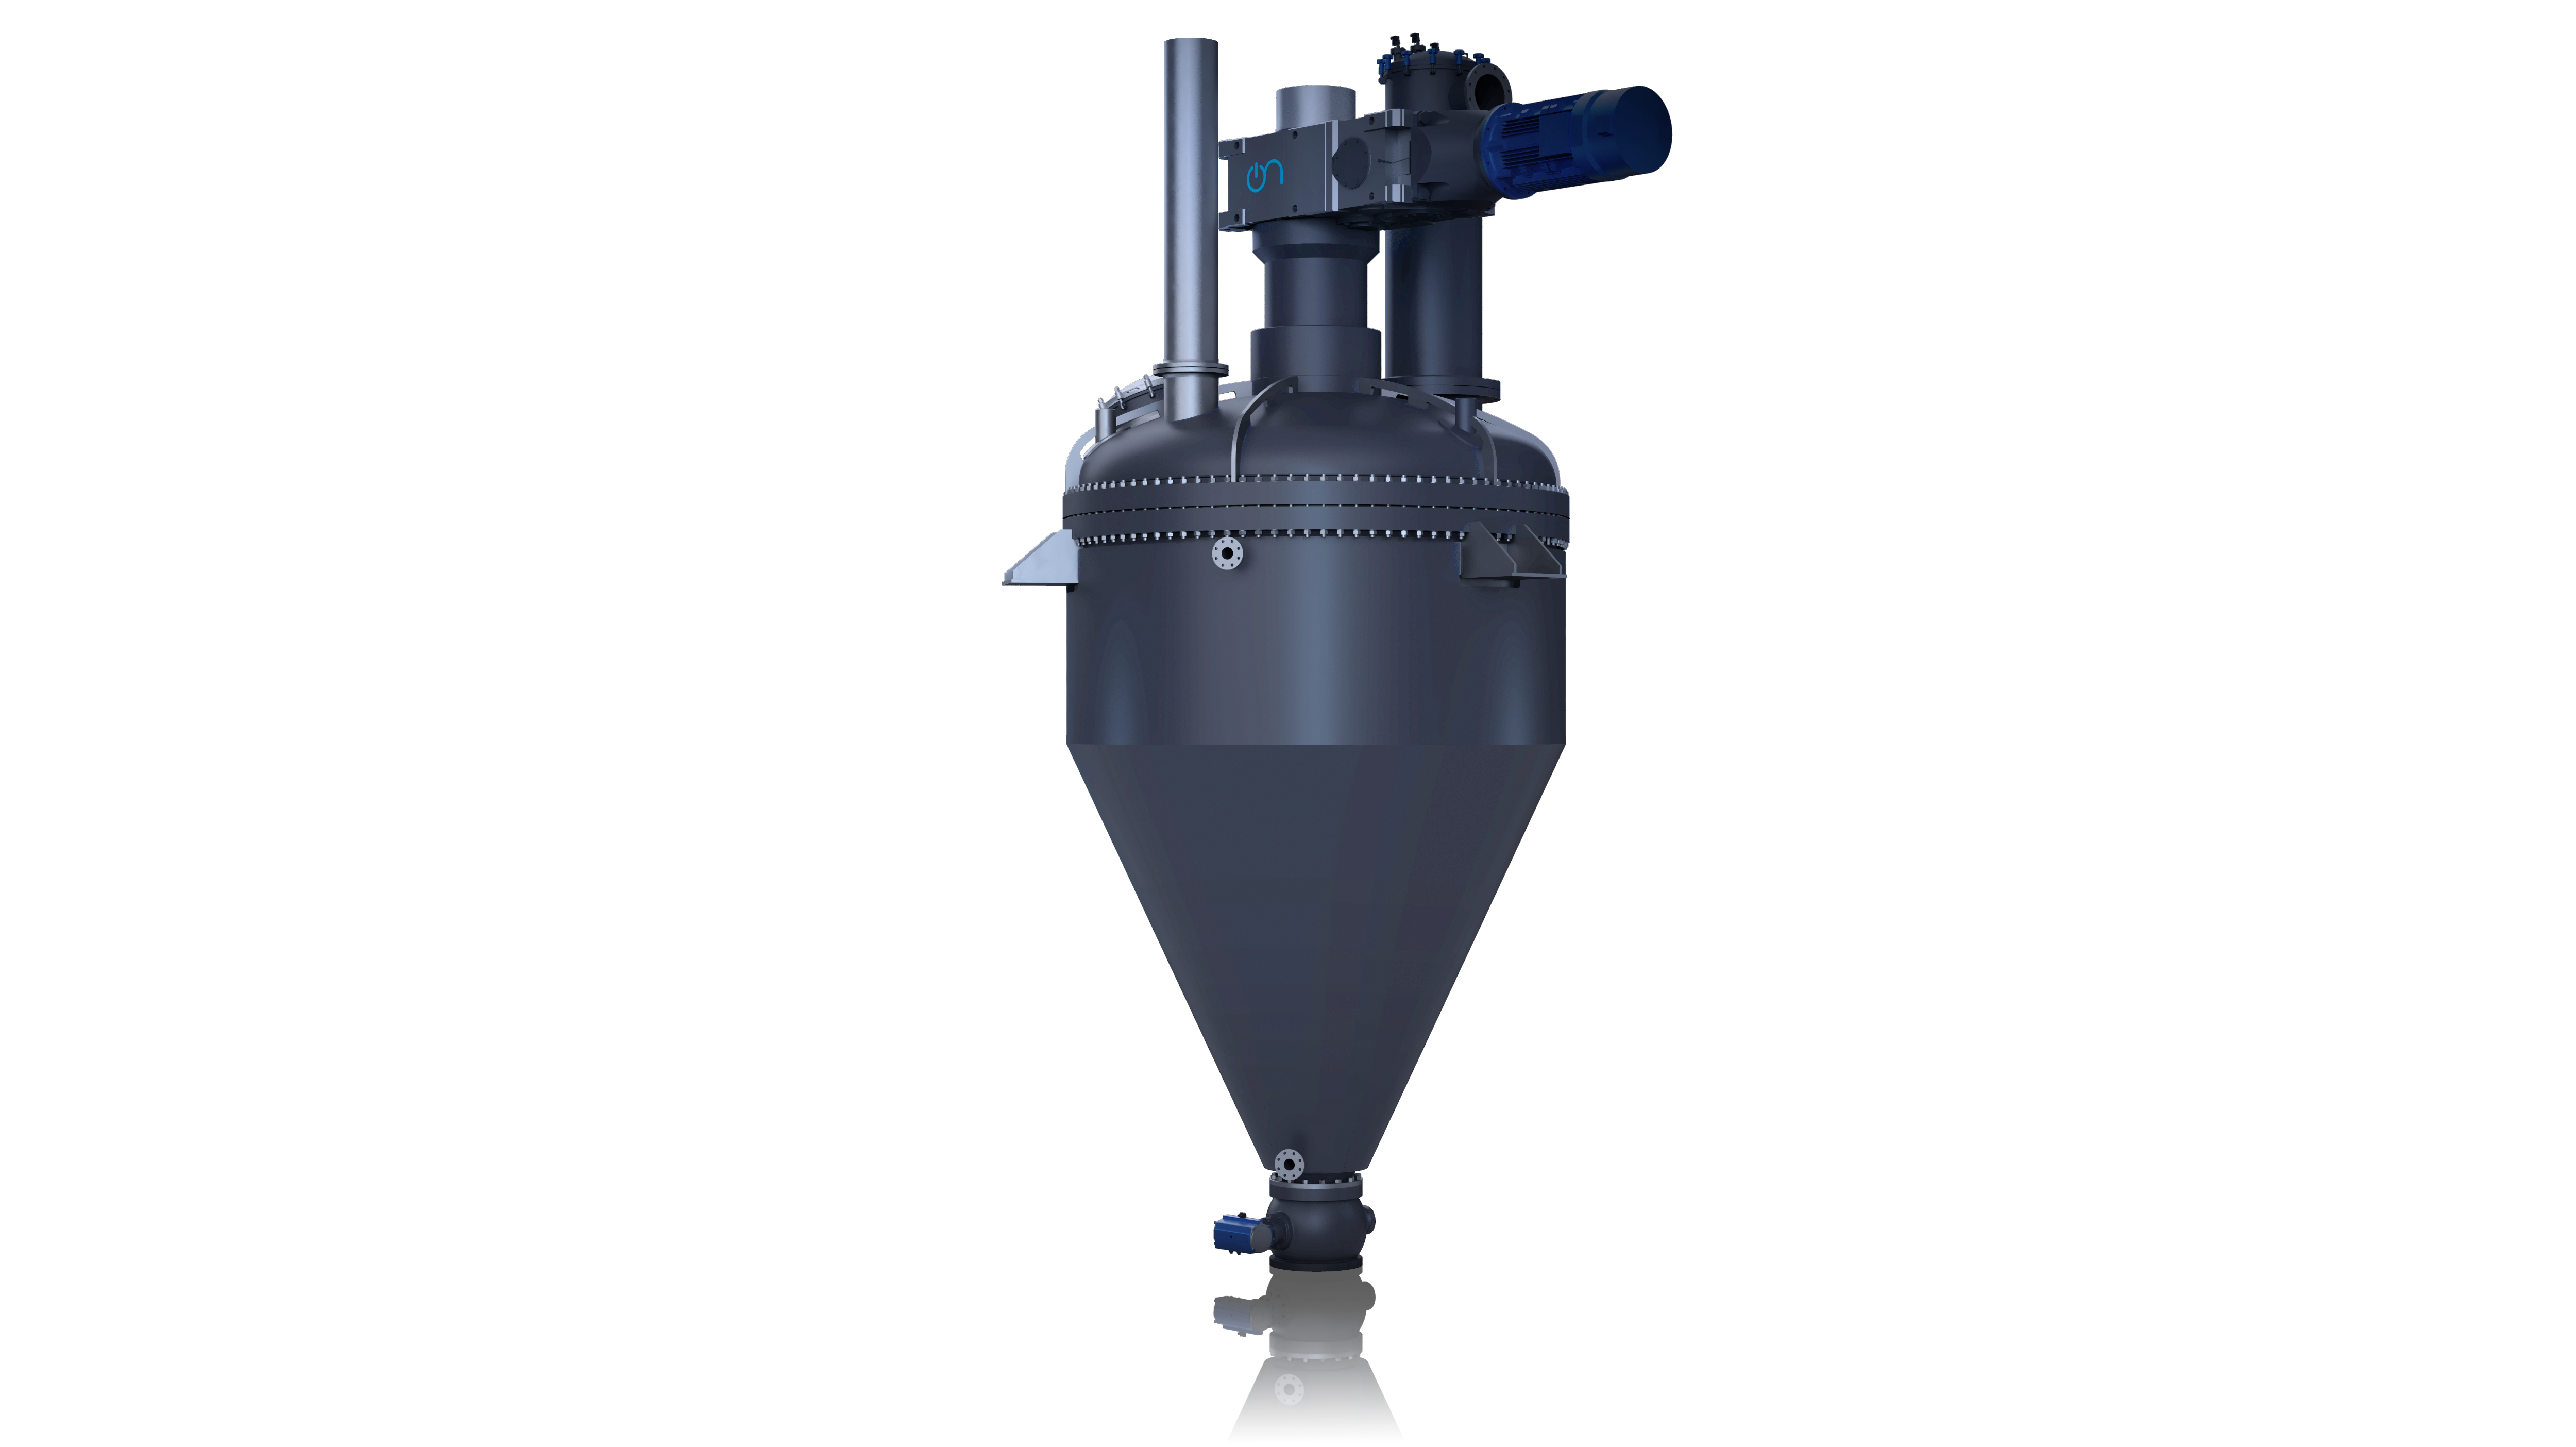  CPD Conical Paddle Dryer